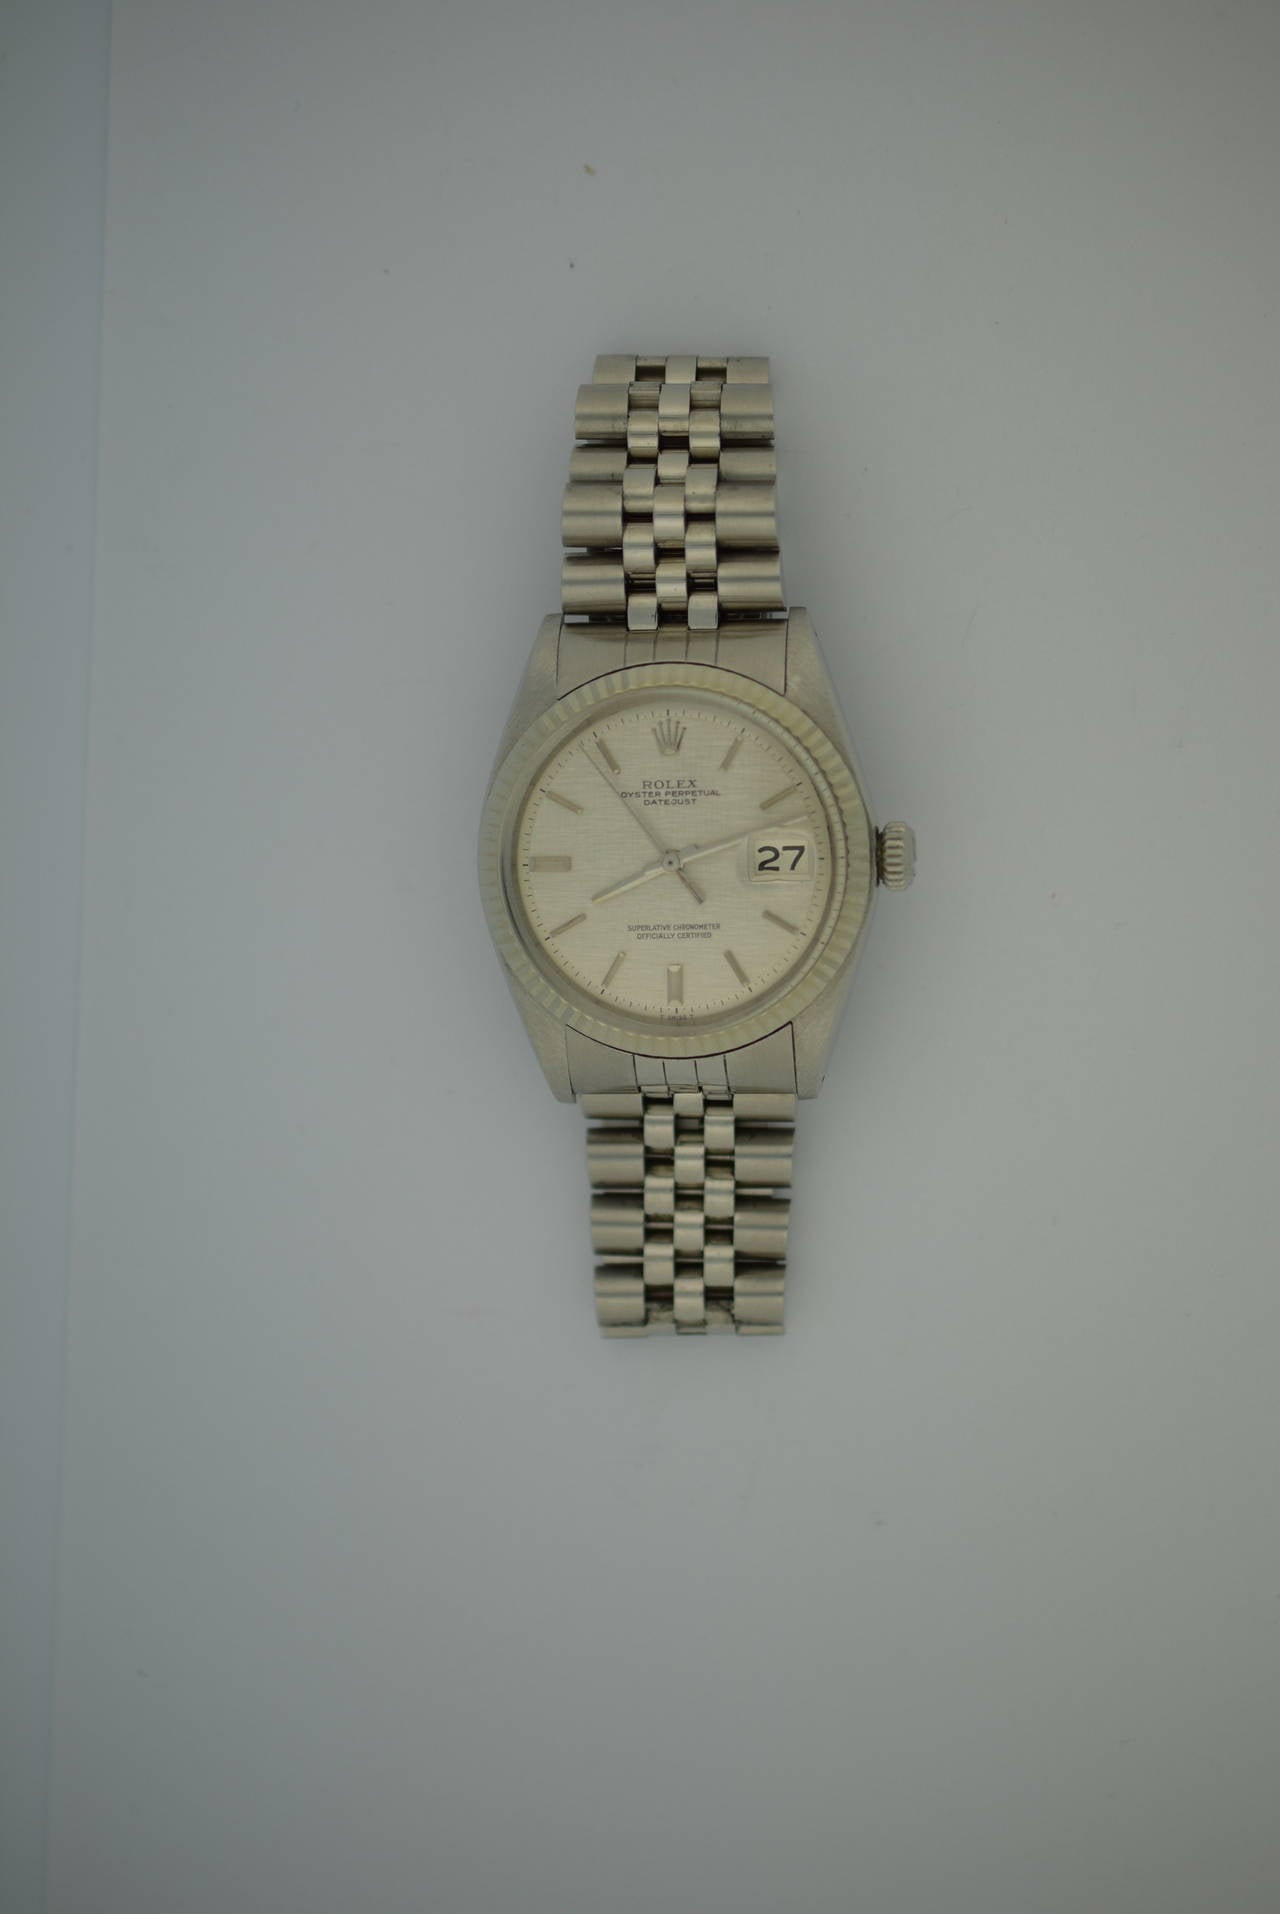 Rolex Classic Datejust Stainless Steel Case with 18K White Gold Bezel.
Reference 1601. Rolex Jubilee Band. Circa 1971.
Serial numbers: 3213466. Silvered Dial with Stainless stick markers.
Comes With Rolex Box. Watch is in very good condition and